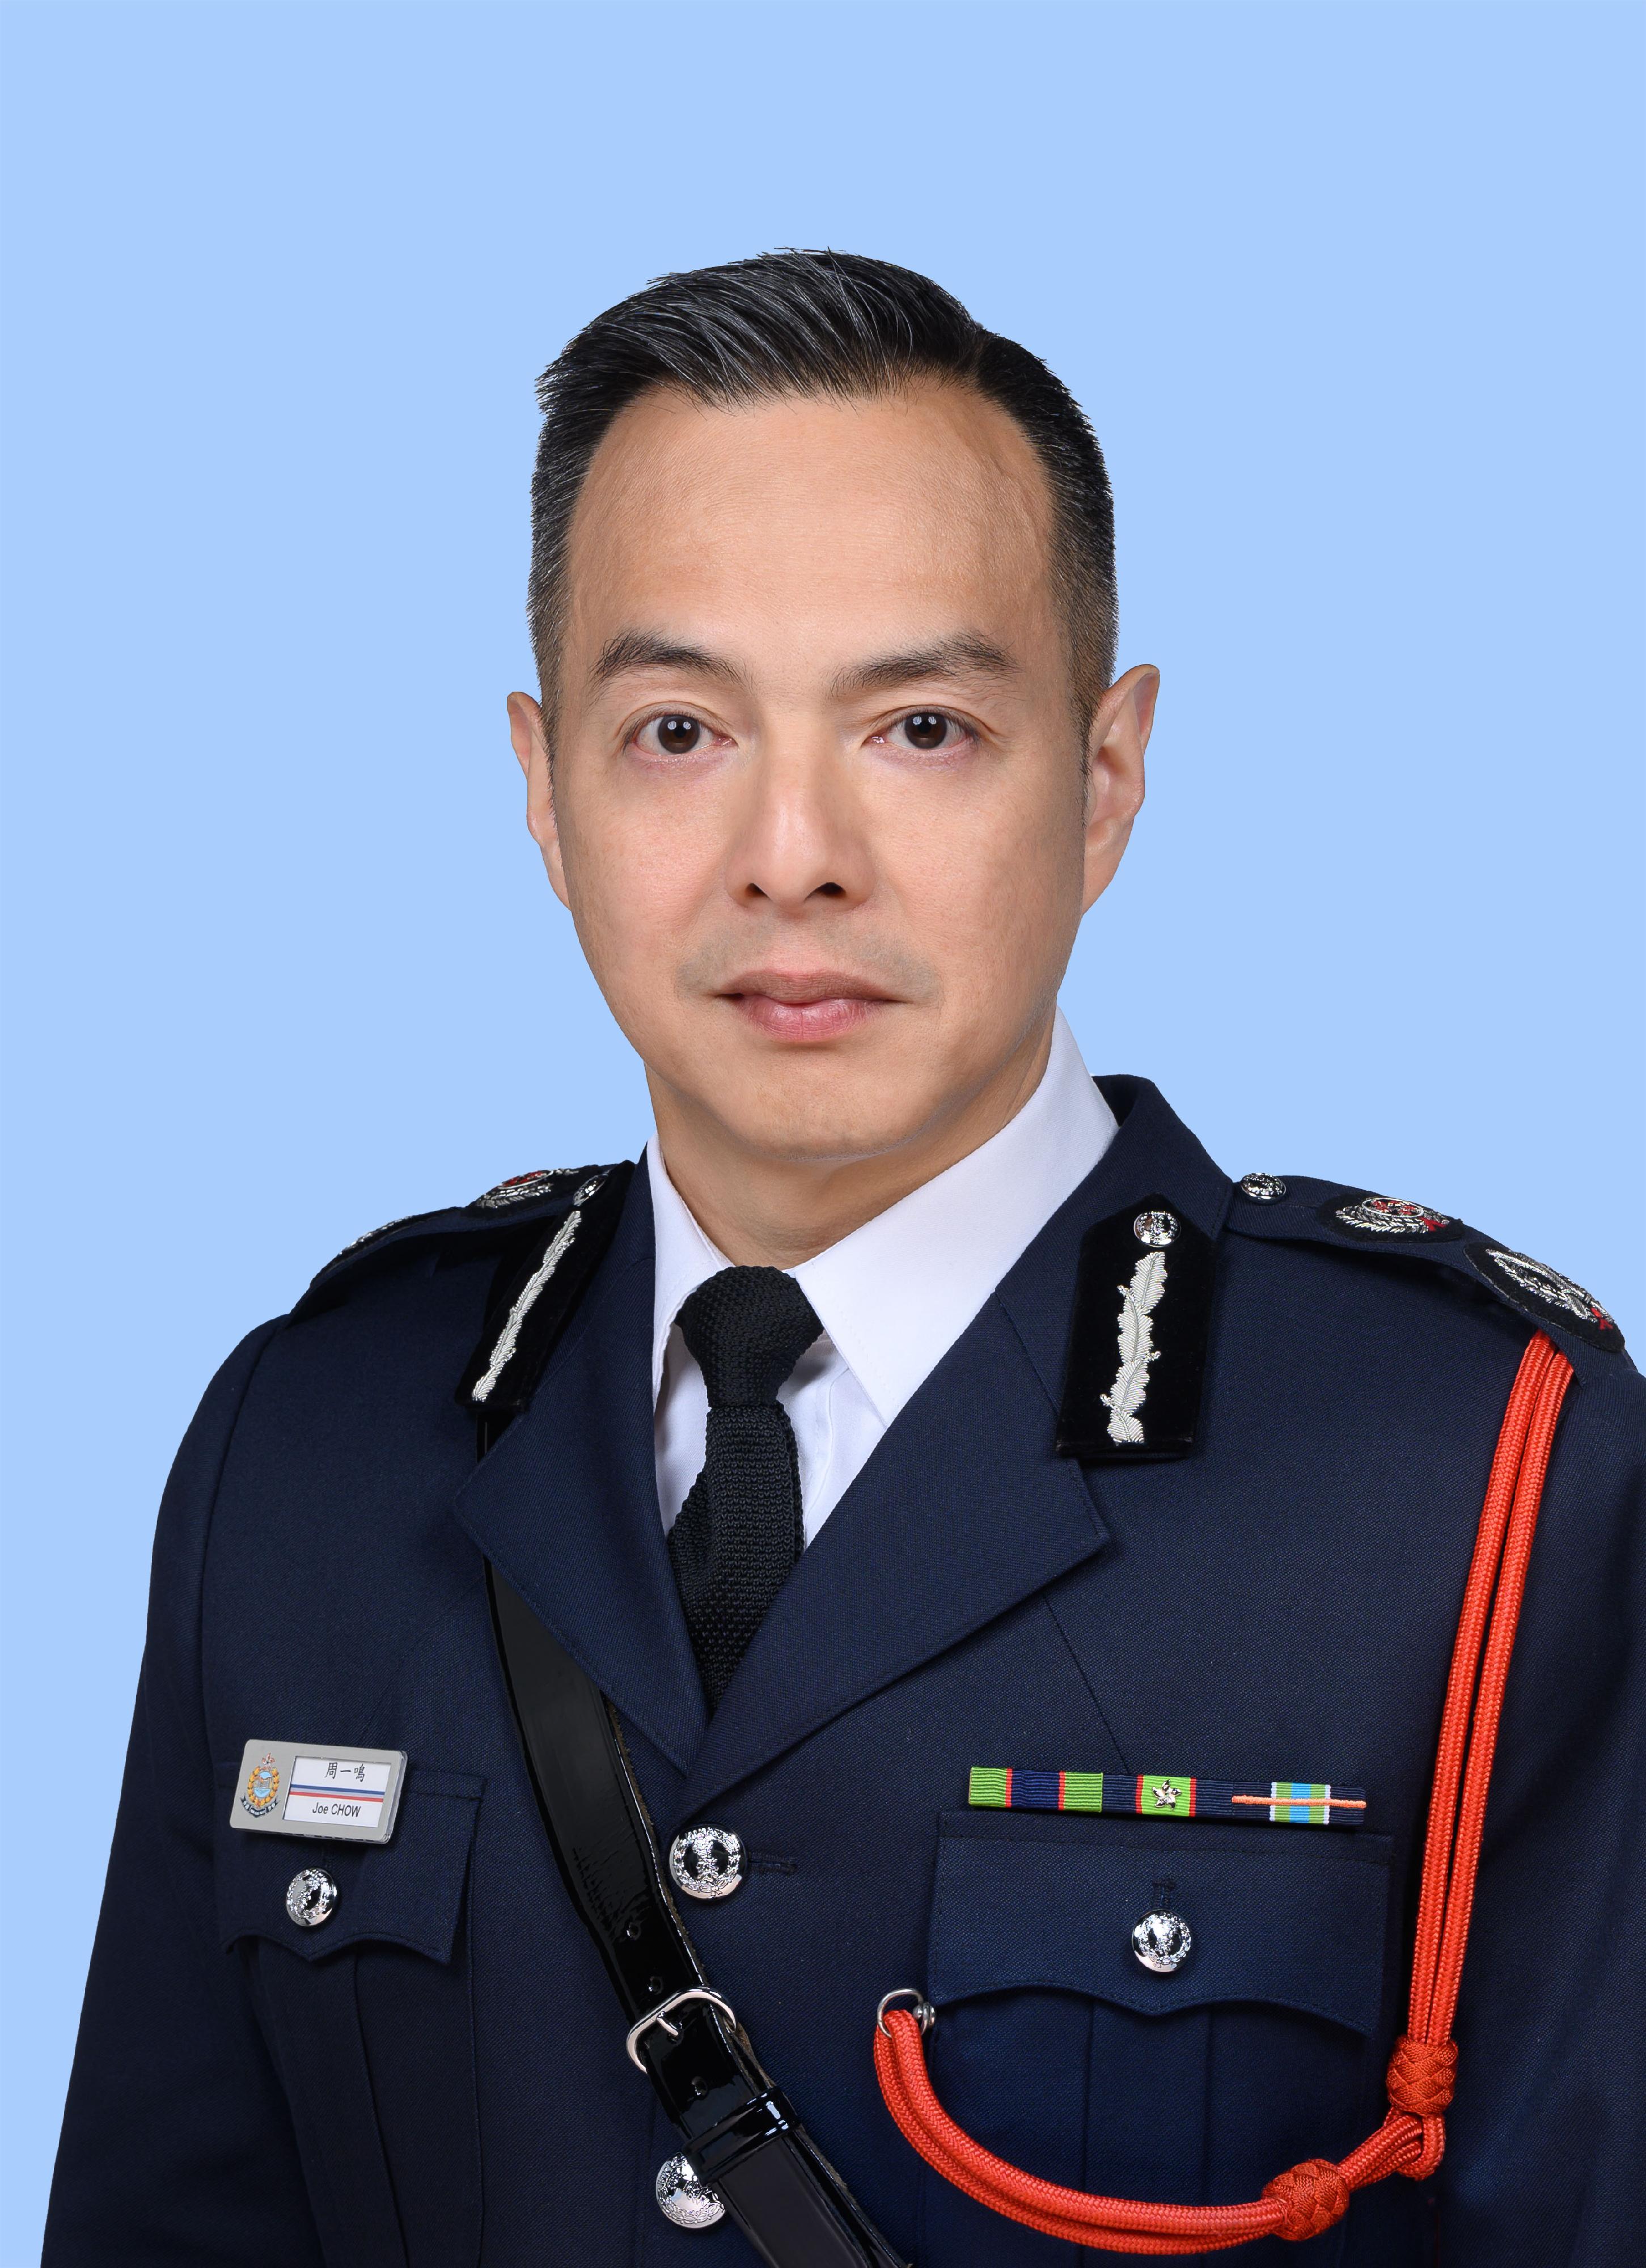 The Deputy Commissioner of Police (Management), Mr Chow Yat-ming, will assume the post of Deputy Commissioner of Police (Operations) with effect from August 16, 2023.